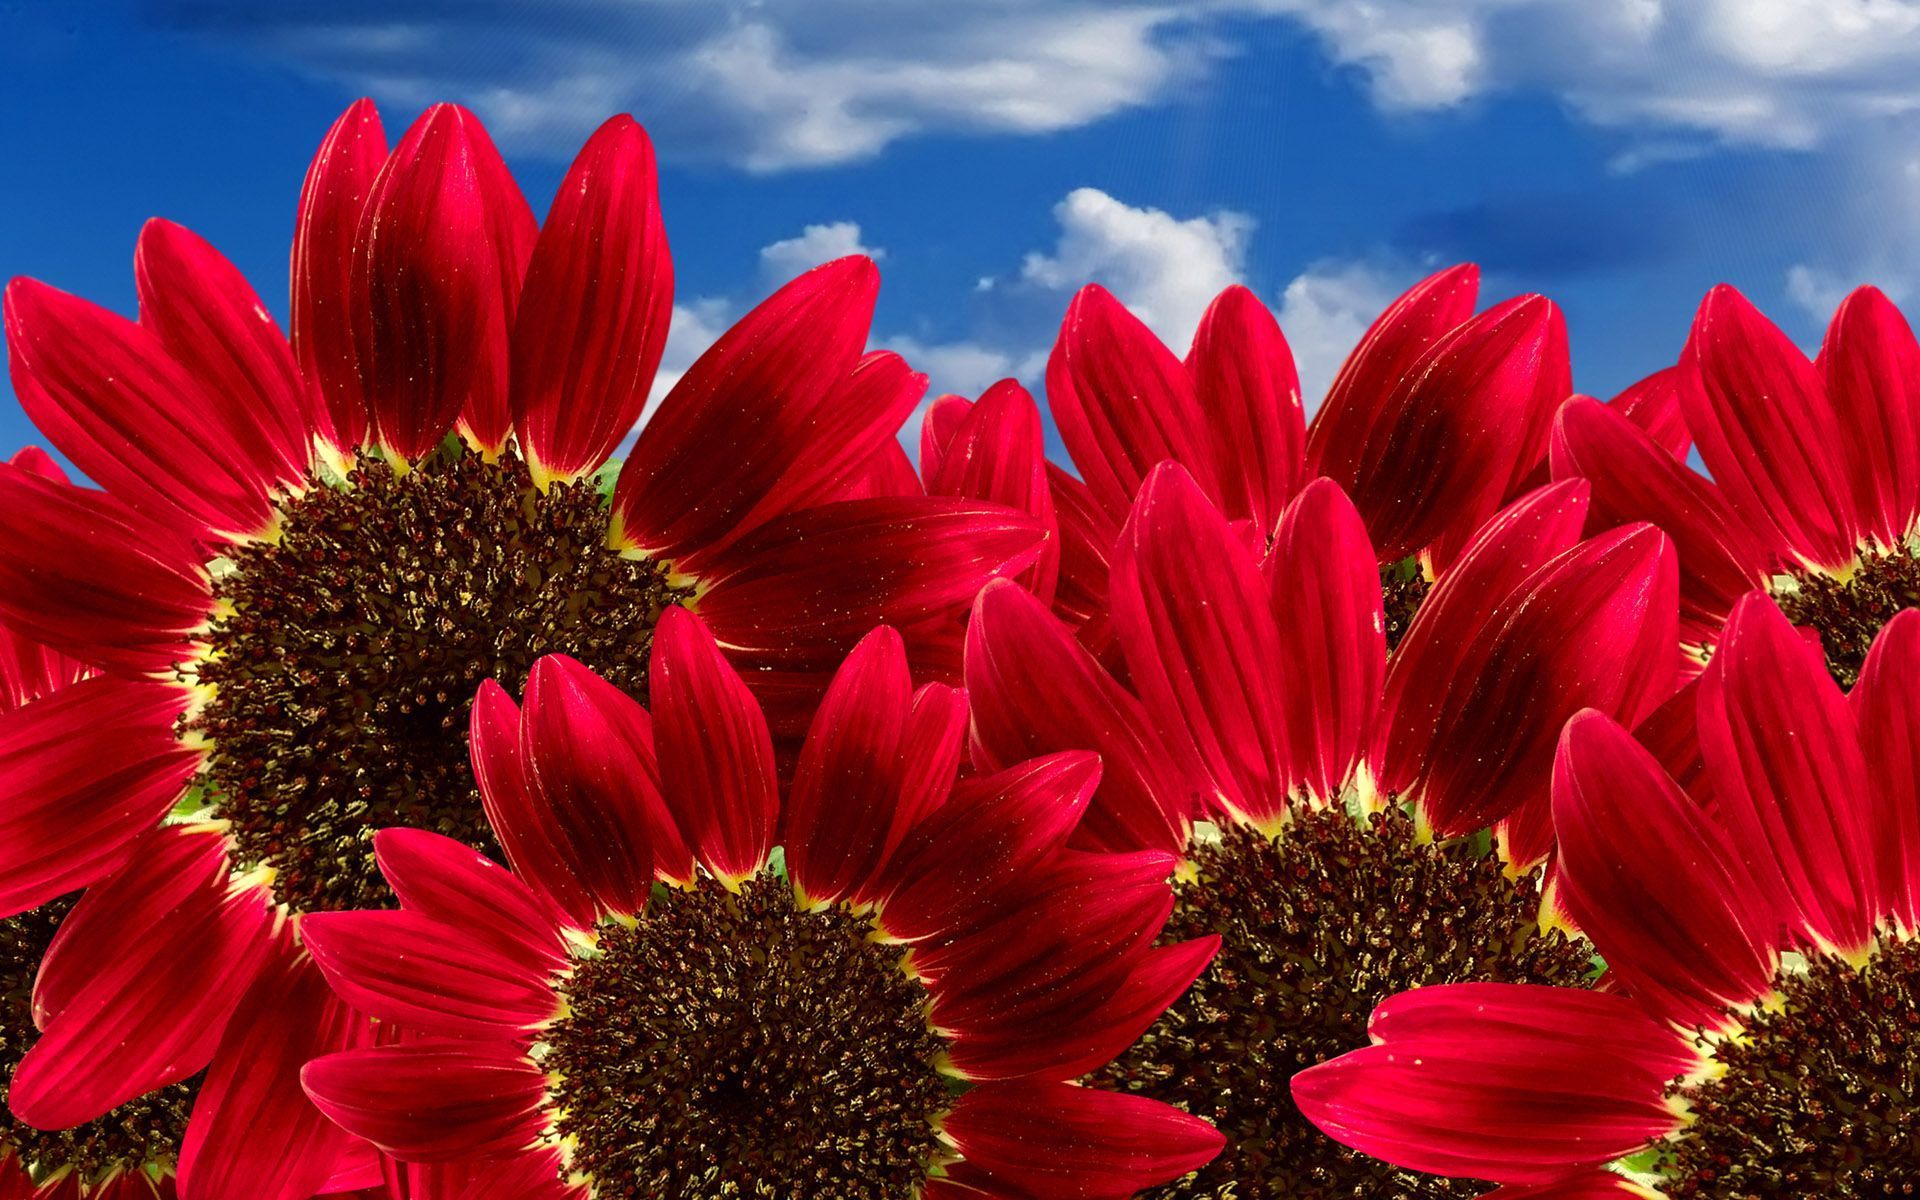 Pure Red Sunflowers Wallpapers HD Backgrounds